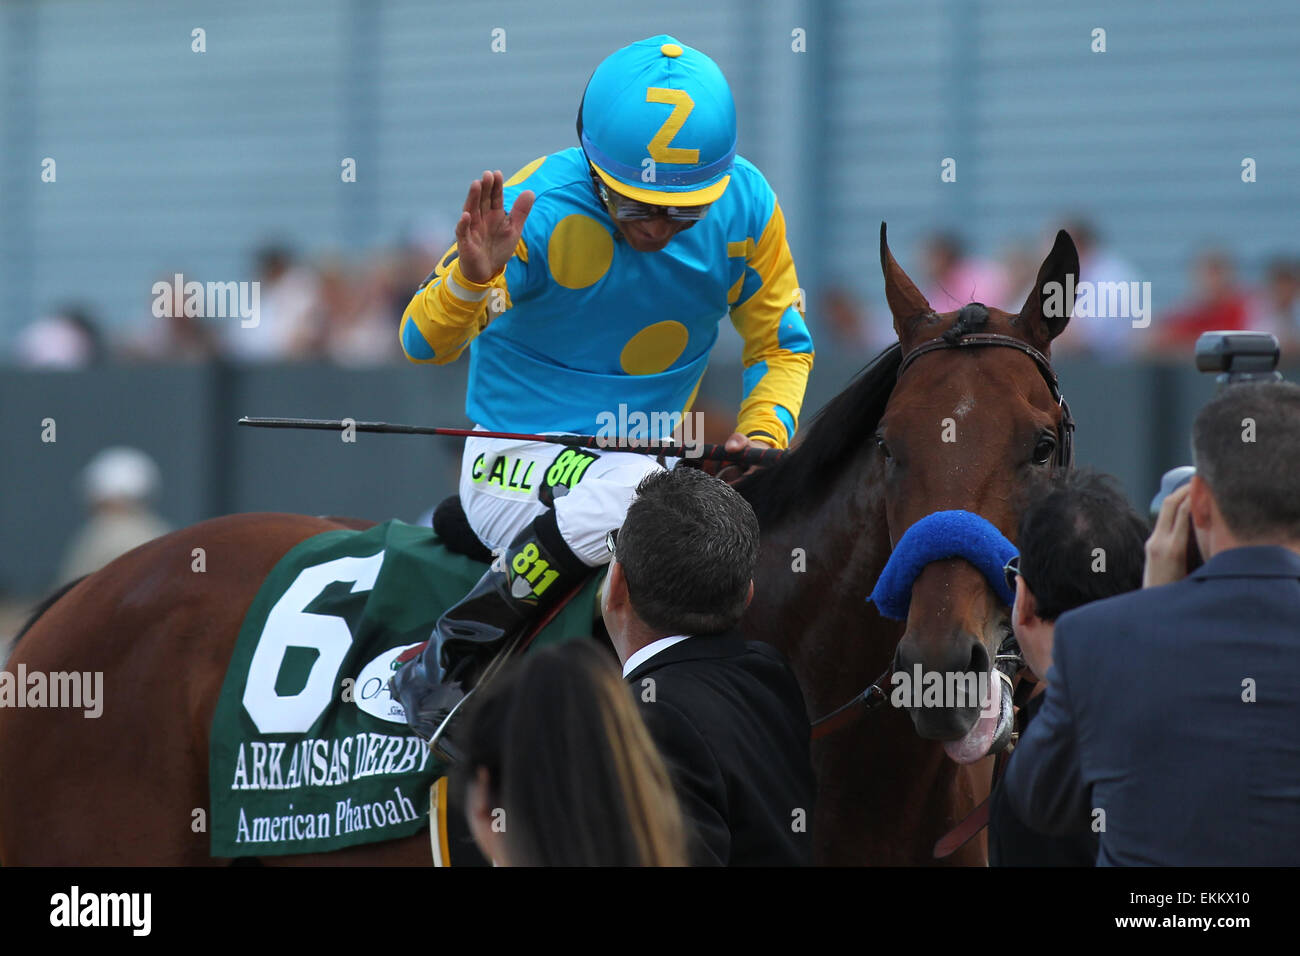 Hot Springs, Arkansas, USA. 11th Apr, 2015. American Pharoah with jockey Victor Espinoza aboard celebrating with co-trainer Jimmy Barnes after winning the Arkansas Derby at Oaklawn Park in Hot Springs, AR. Justin Manning/ESW/CSM/Alamy Live News Stock Photo